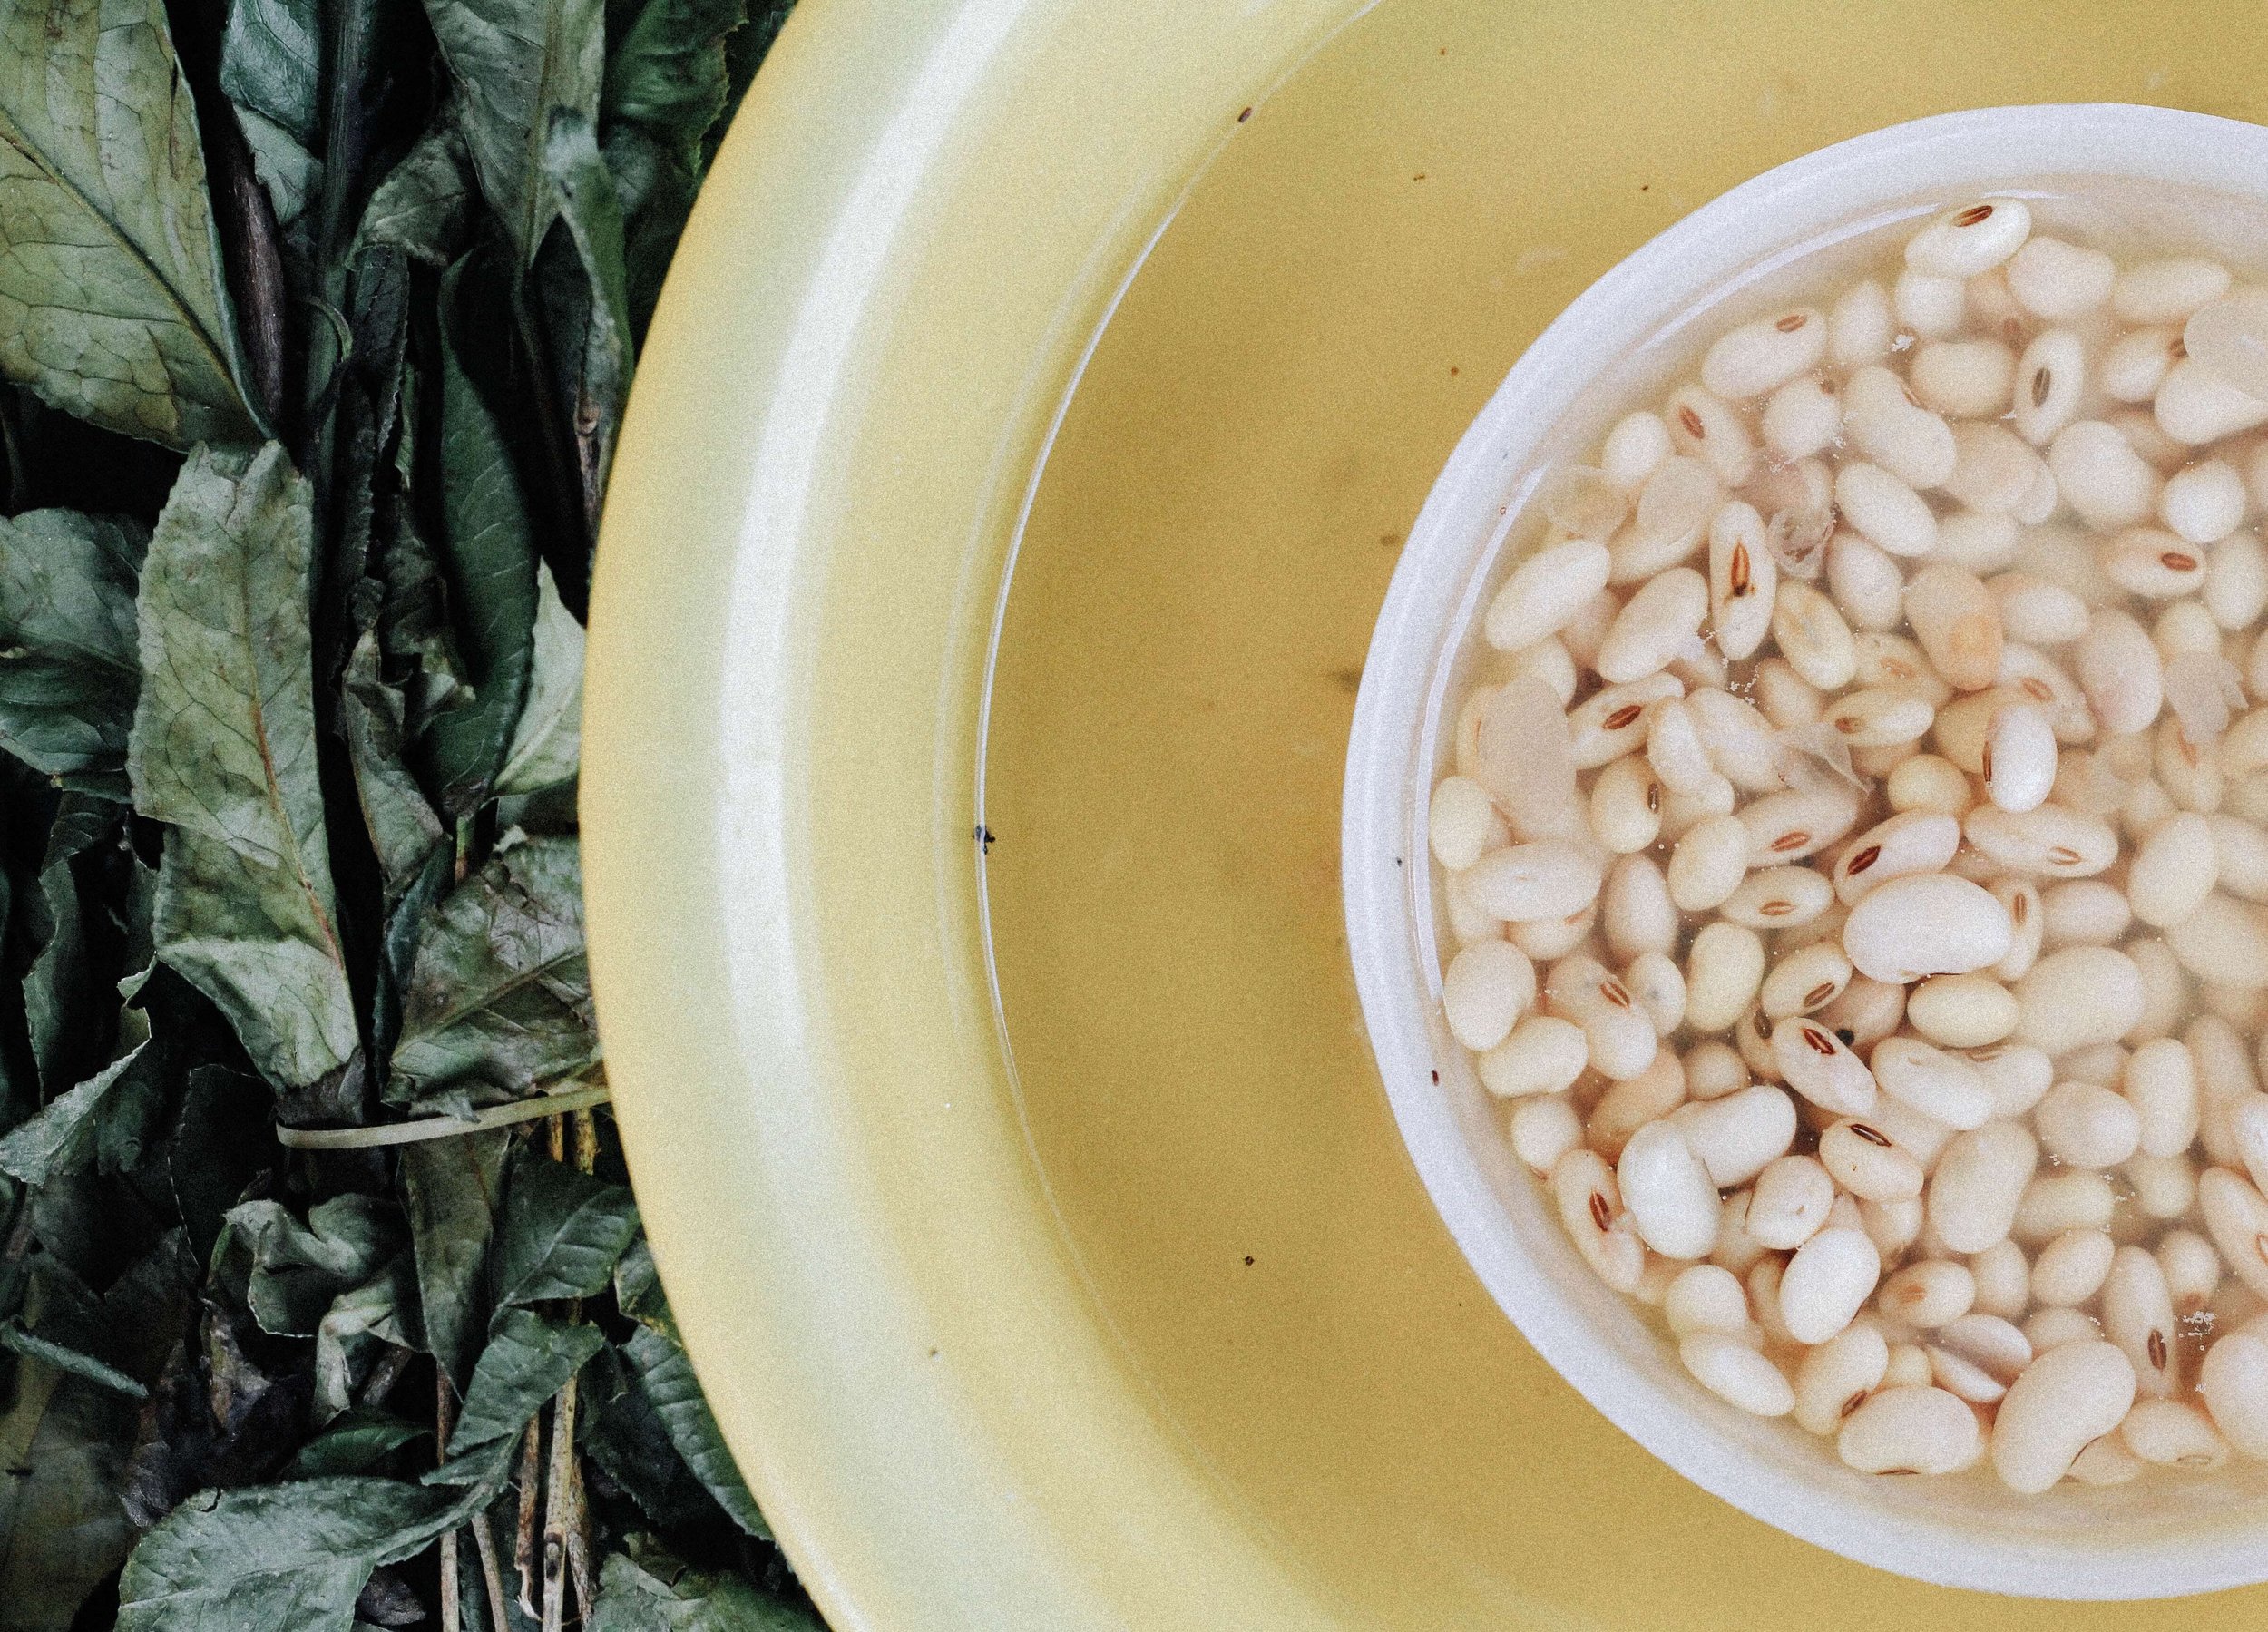 What's a legume and why should I eat it?